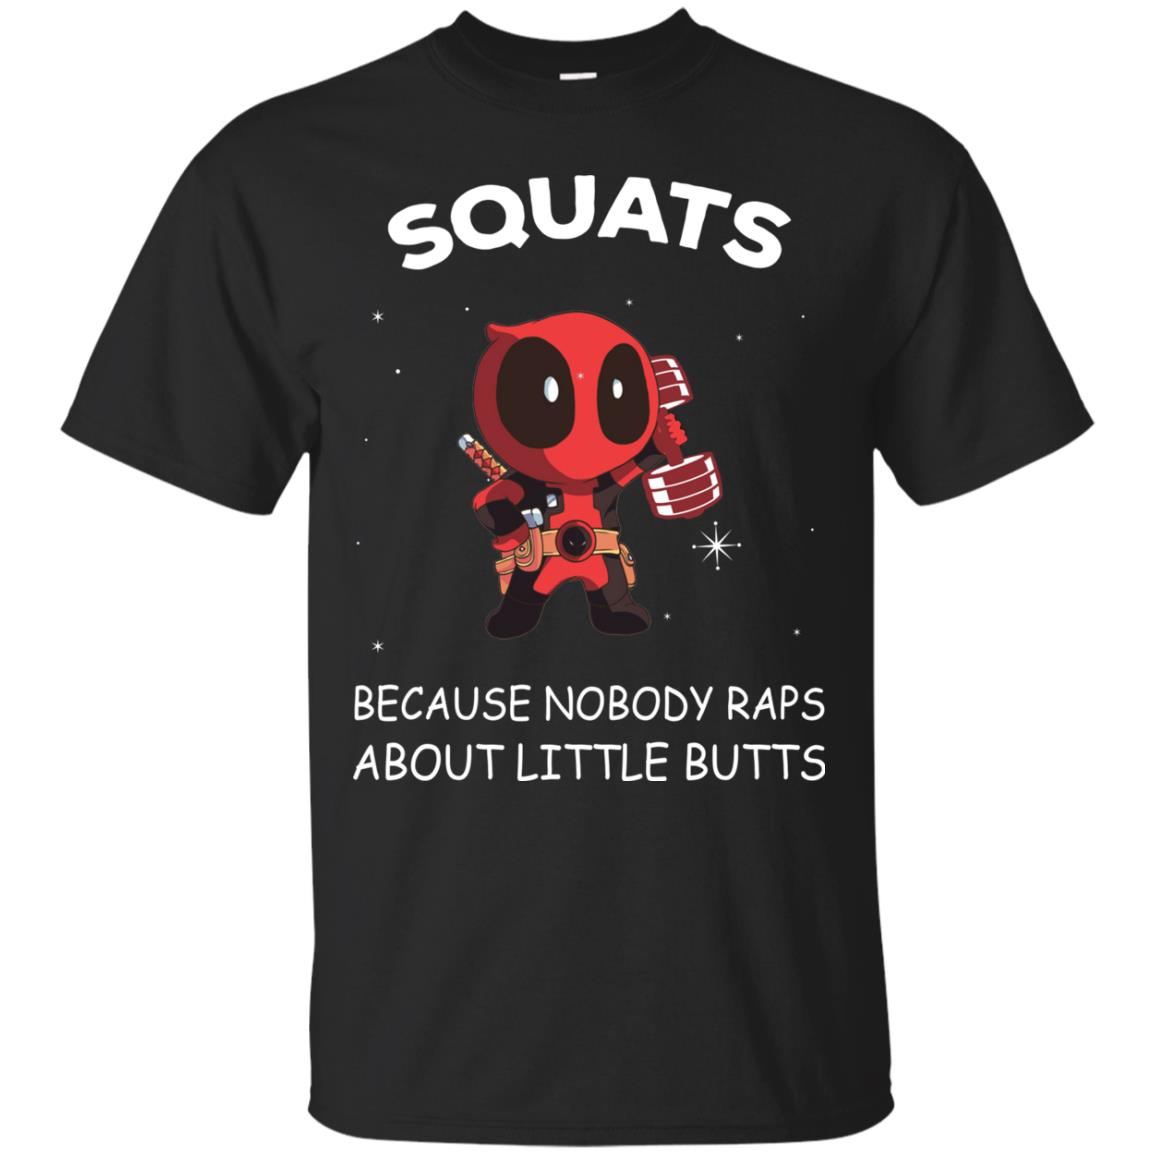 DeadPool: Squats Because Nobody Raps About Little Butts T Shirts